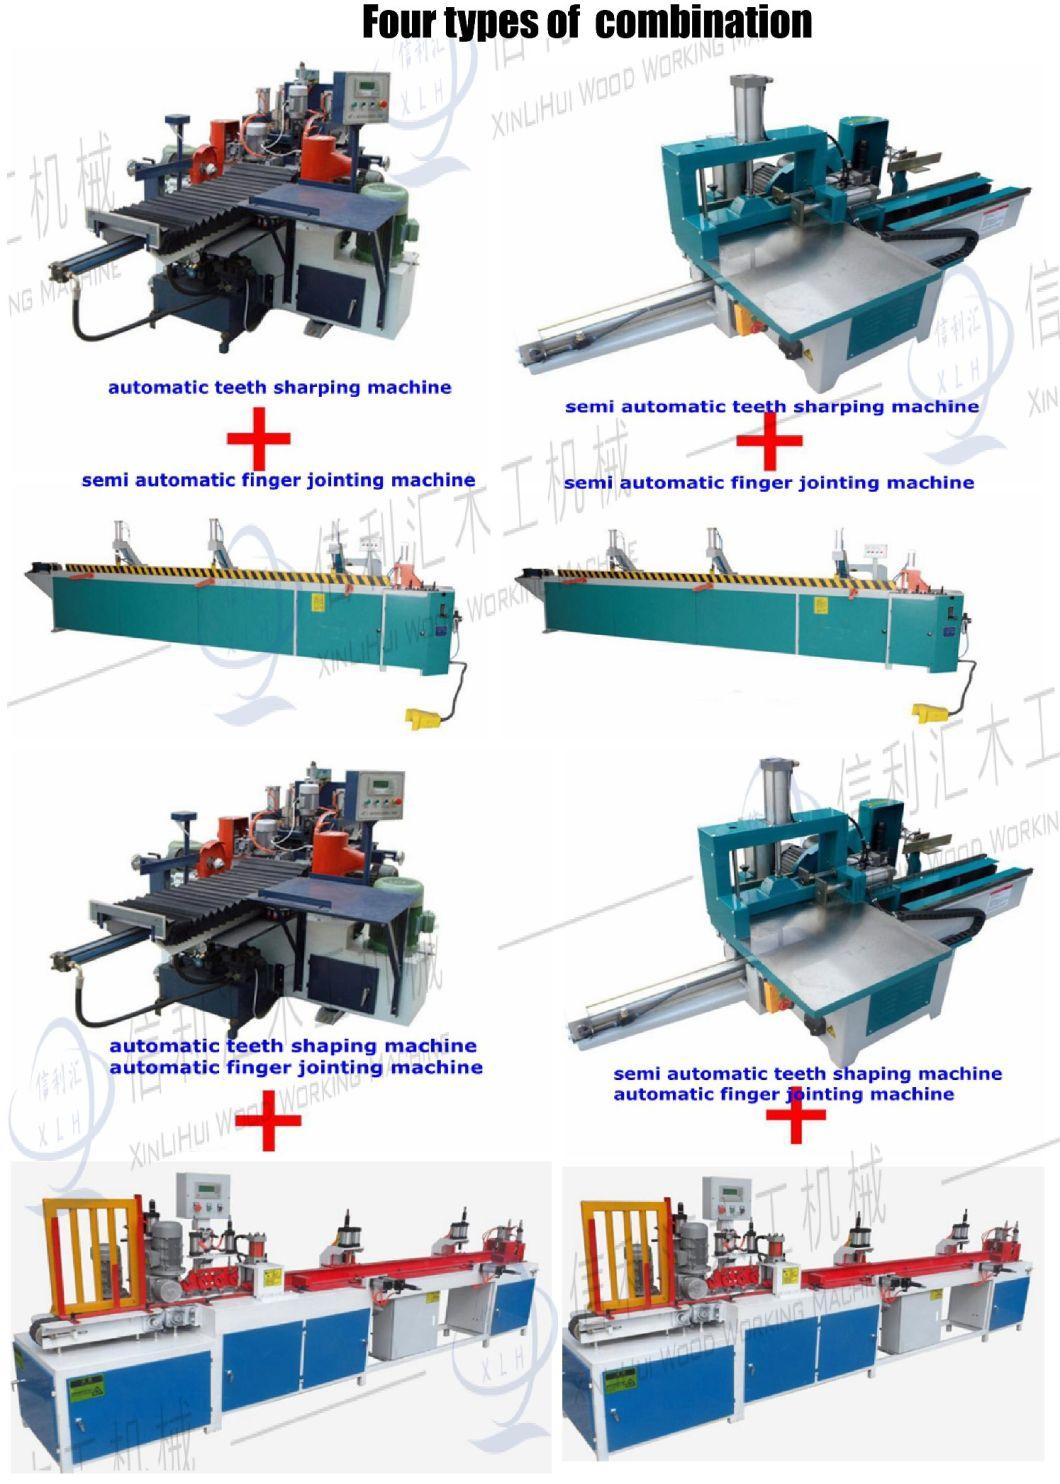 Jointers, Planers, Laminating Line, etc for Resale Woodworking Mahcinery Distribuitors, Pressa Idraulica Di Formatura, Finger Joint Legno, Wood Press